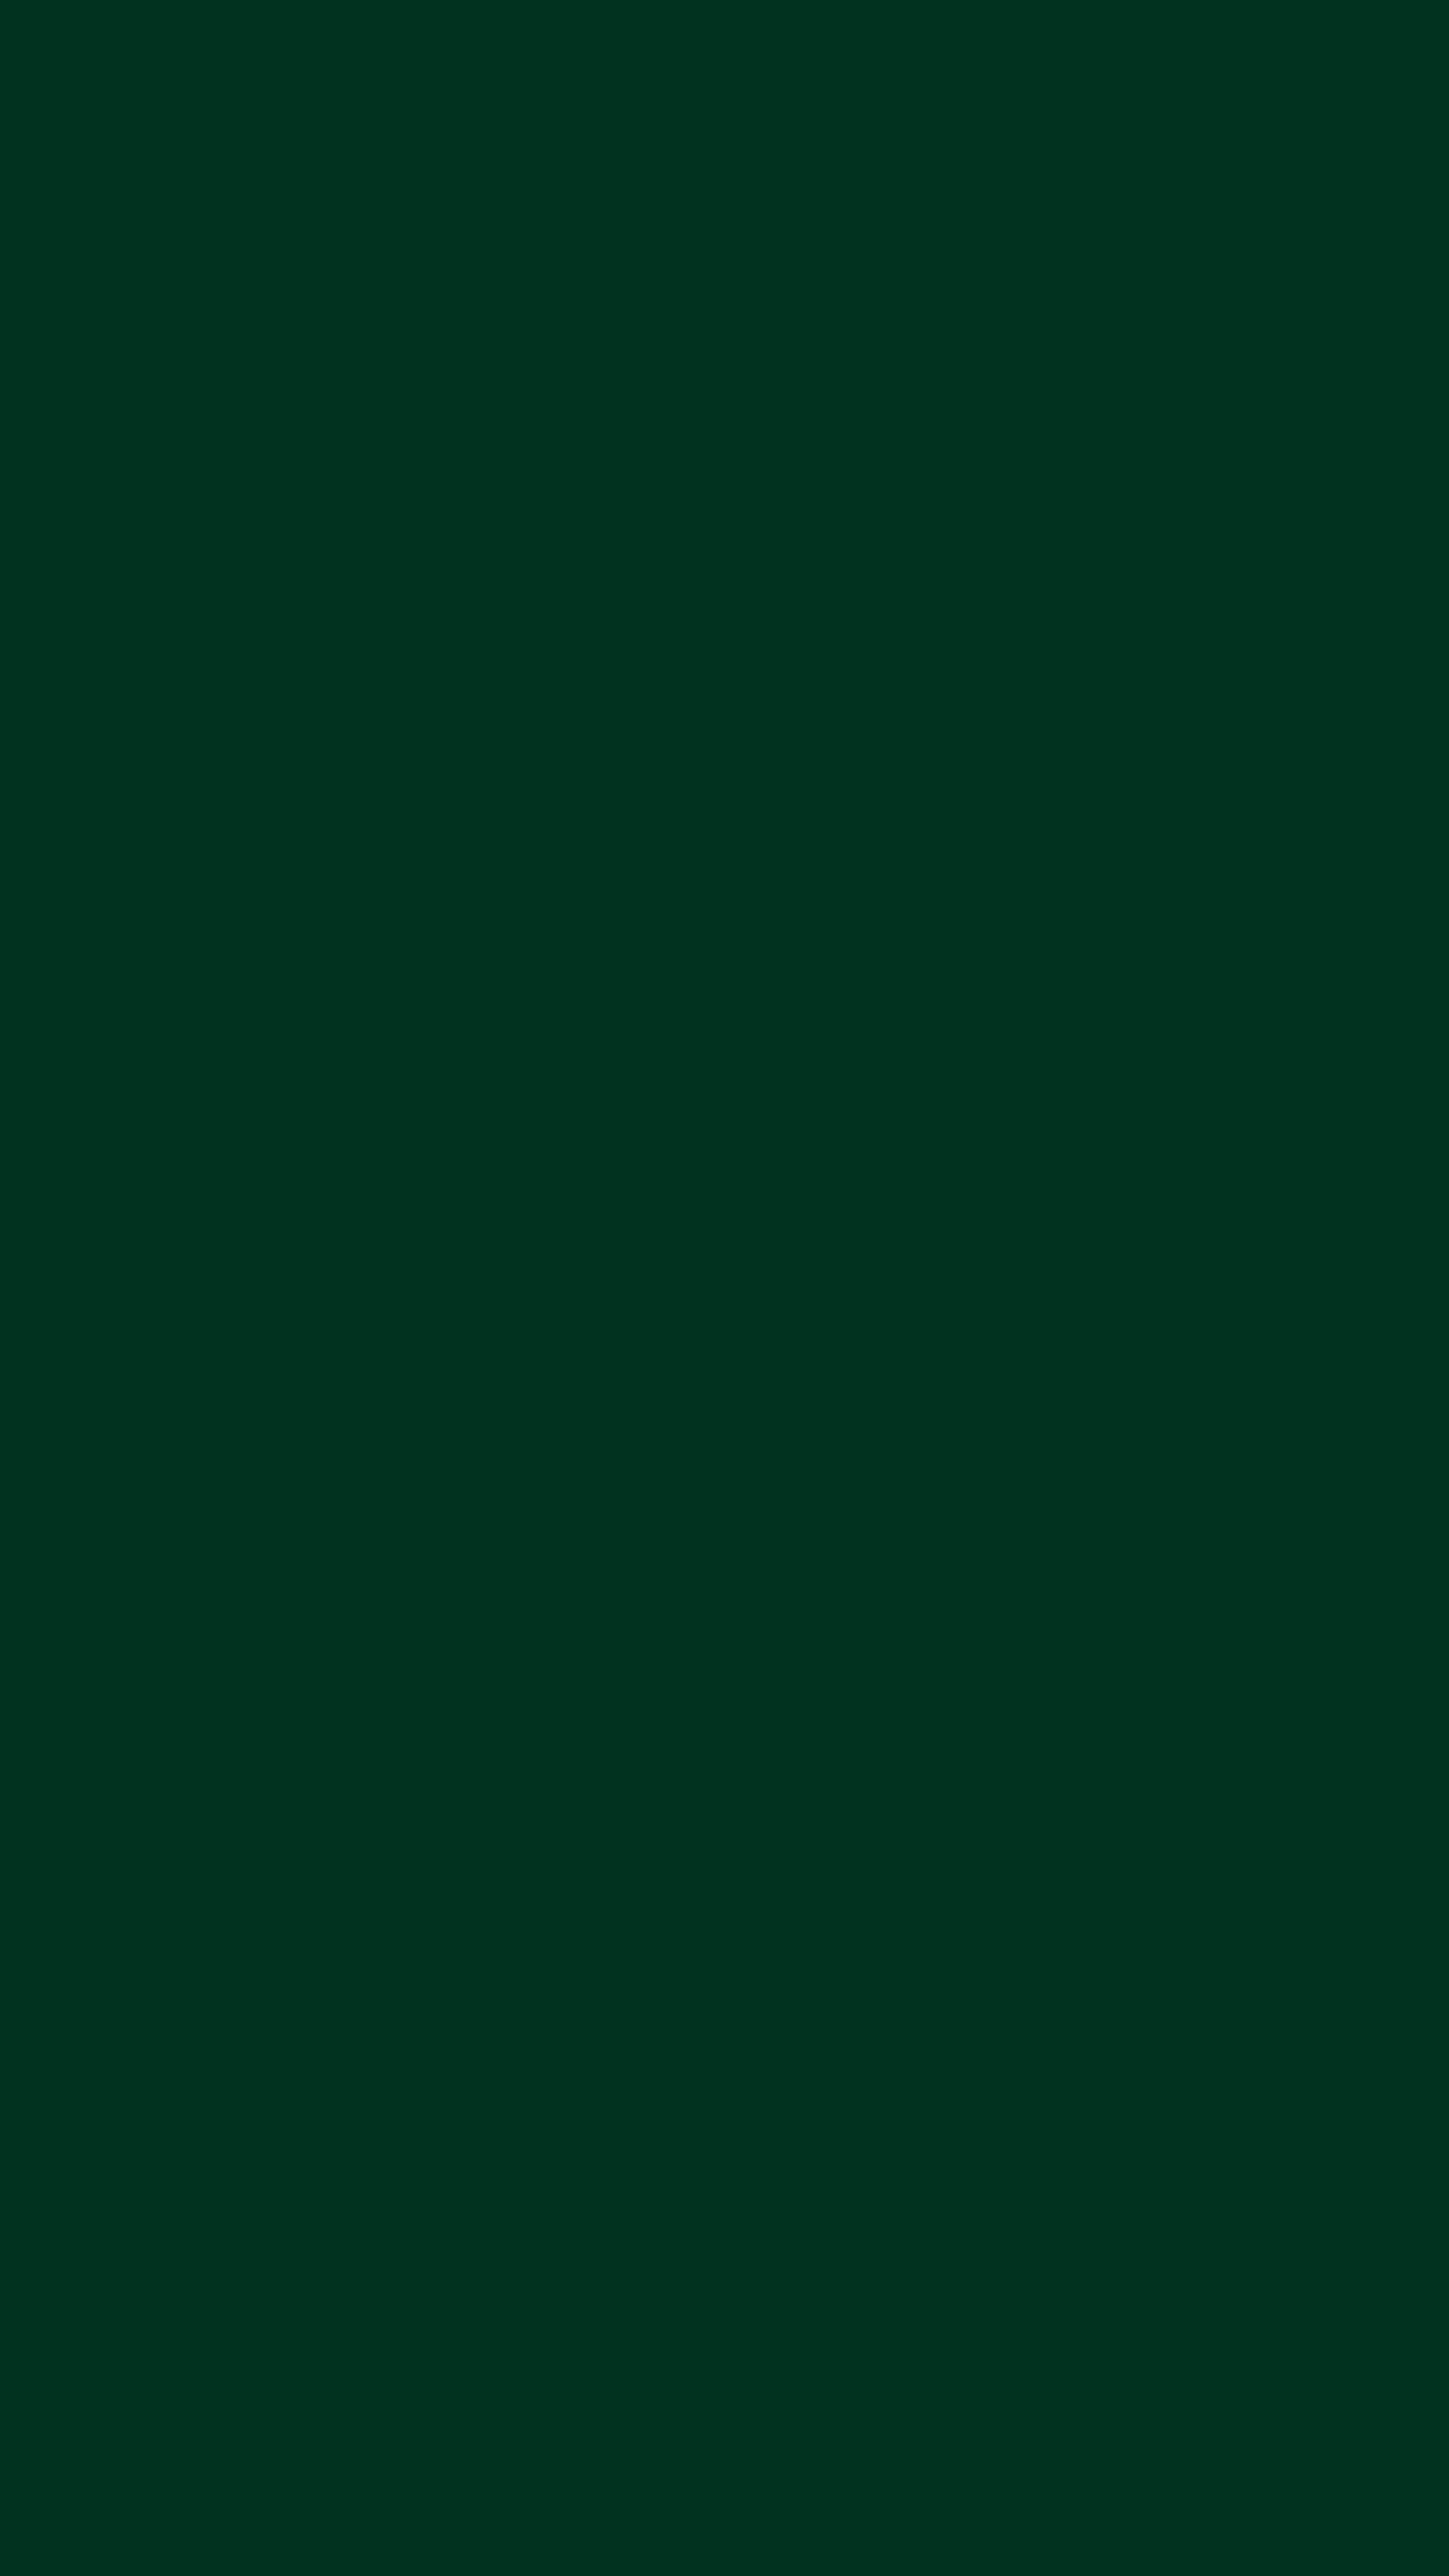 Dark Green Solid Color Background Wallpaper For Mobile – Phone - Chill-out  Wallpapers